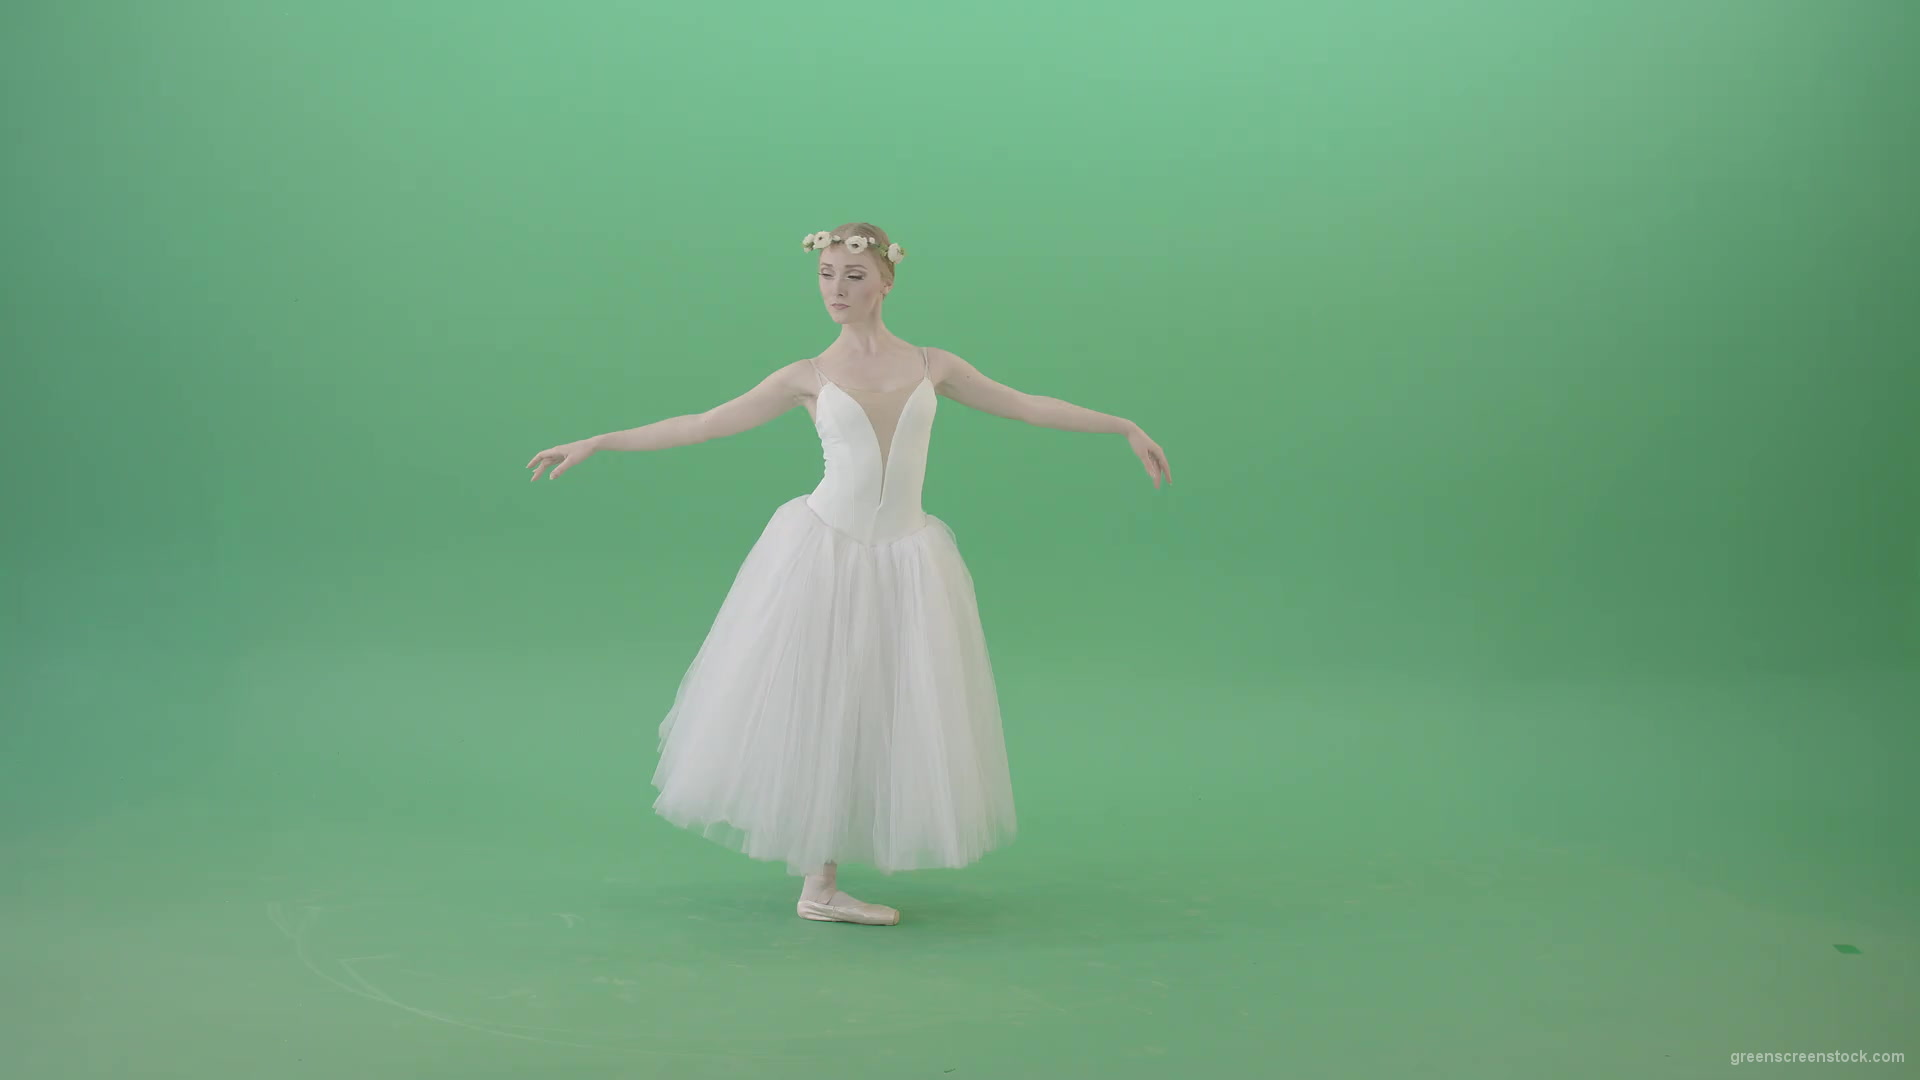 Sensuality-Choreographer-making-regards-in-white-dress-amazing-ballet-girl-isolated-on-green-screen-4K-Video-Footage-1920_001 Green Screen Stock